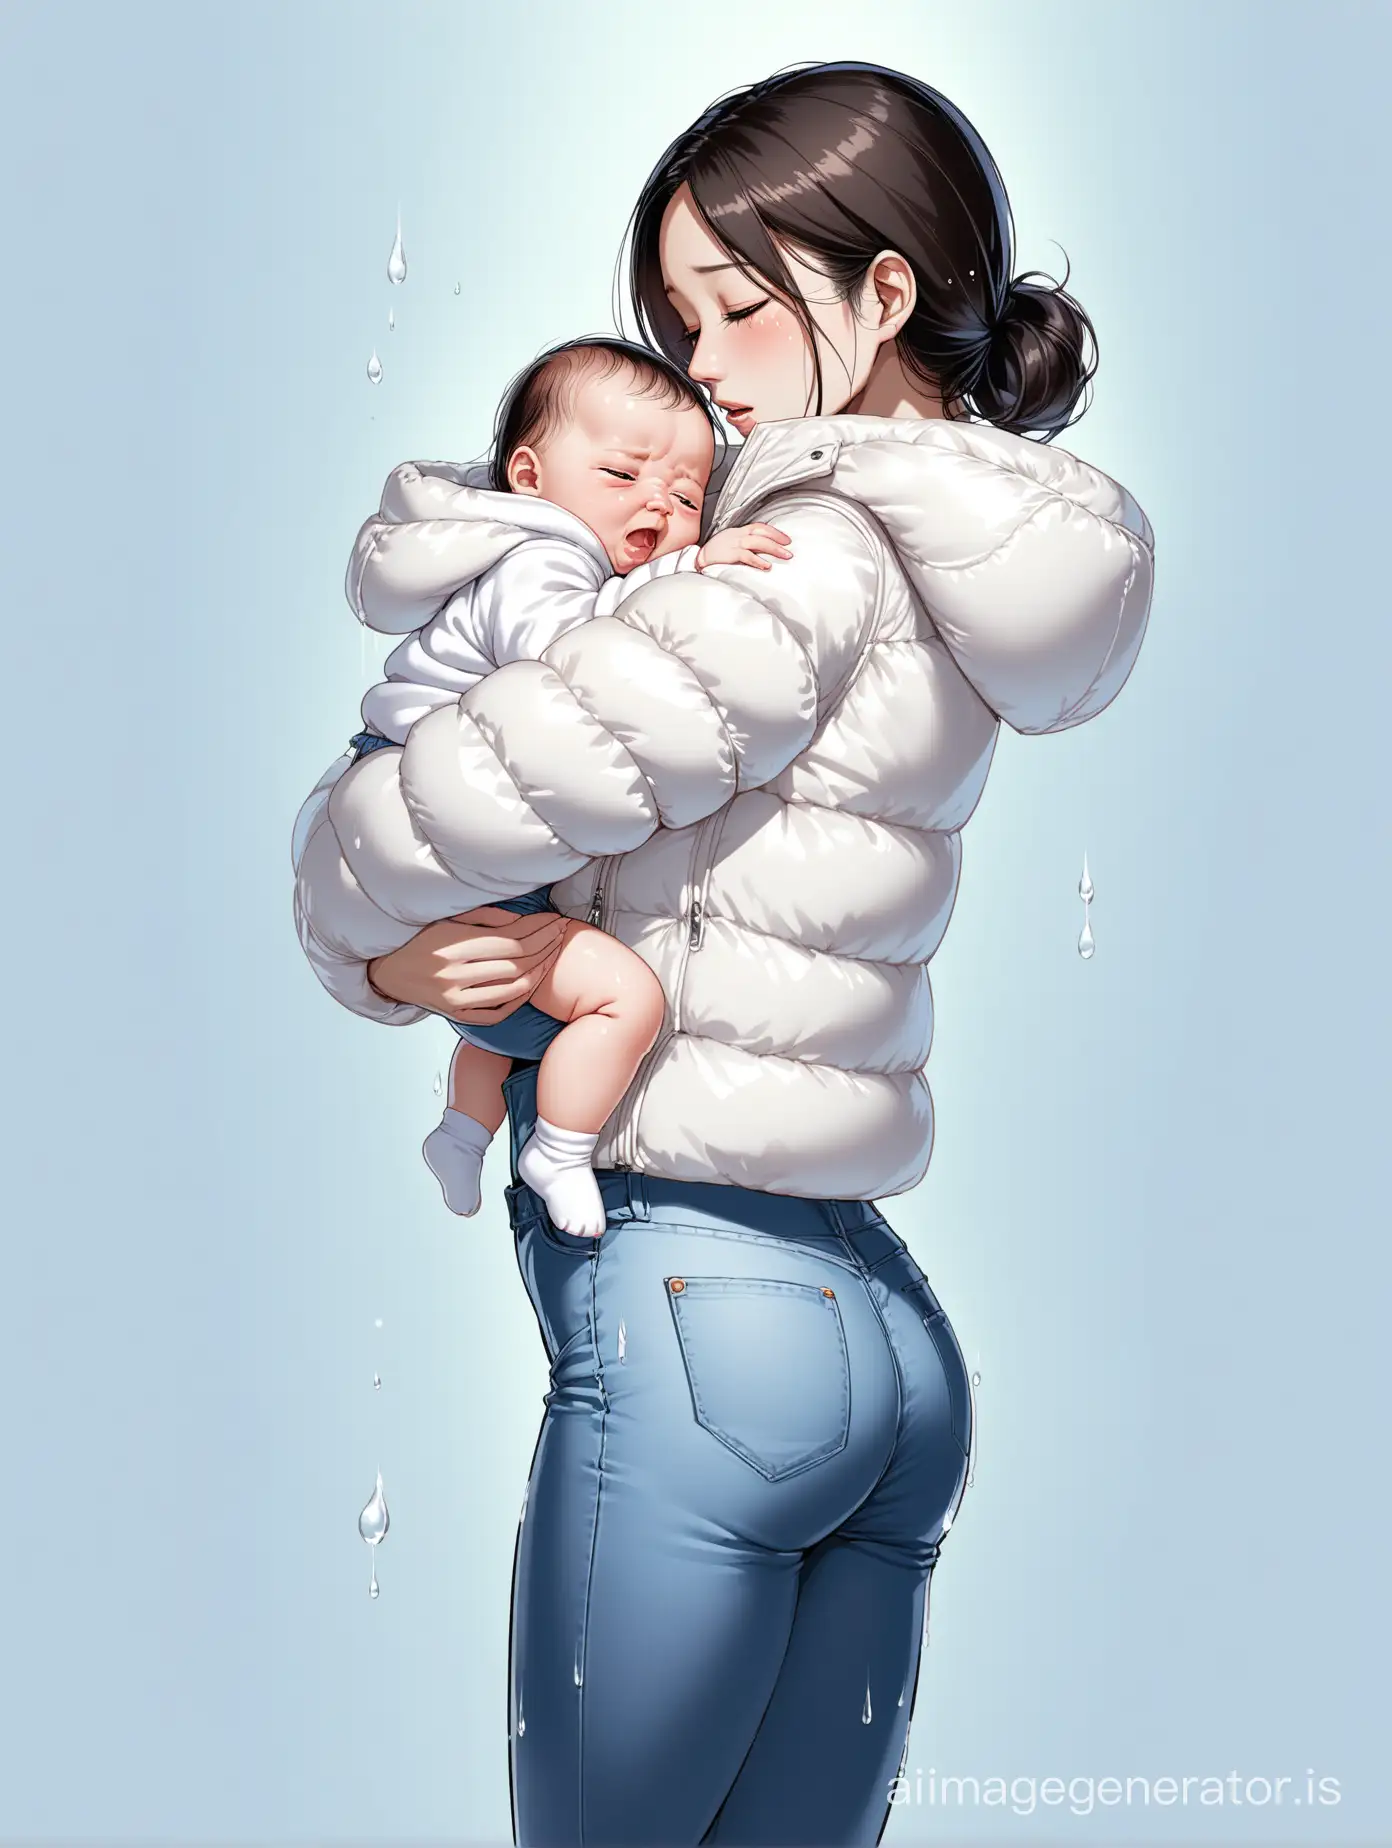 Chinese woman, tall and slender, wearing a white down jacket and tight jeans, holding a baby in her arms, the baby is crying.